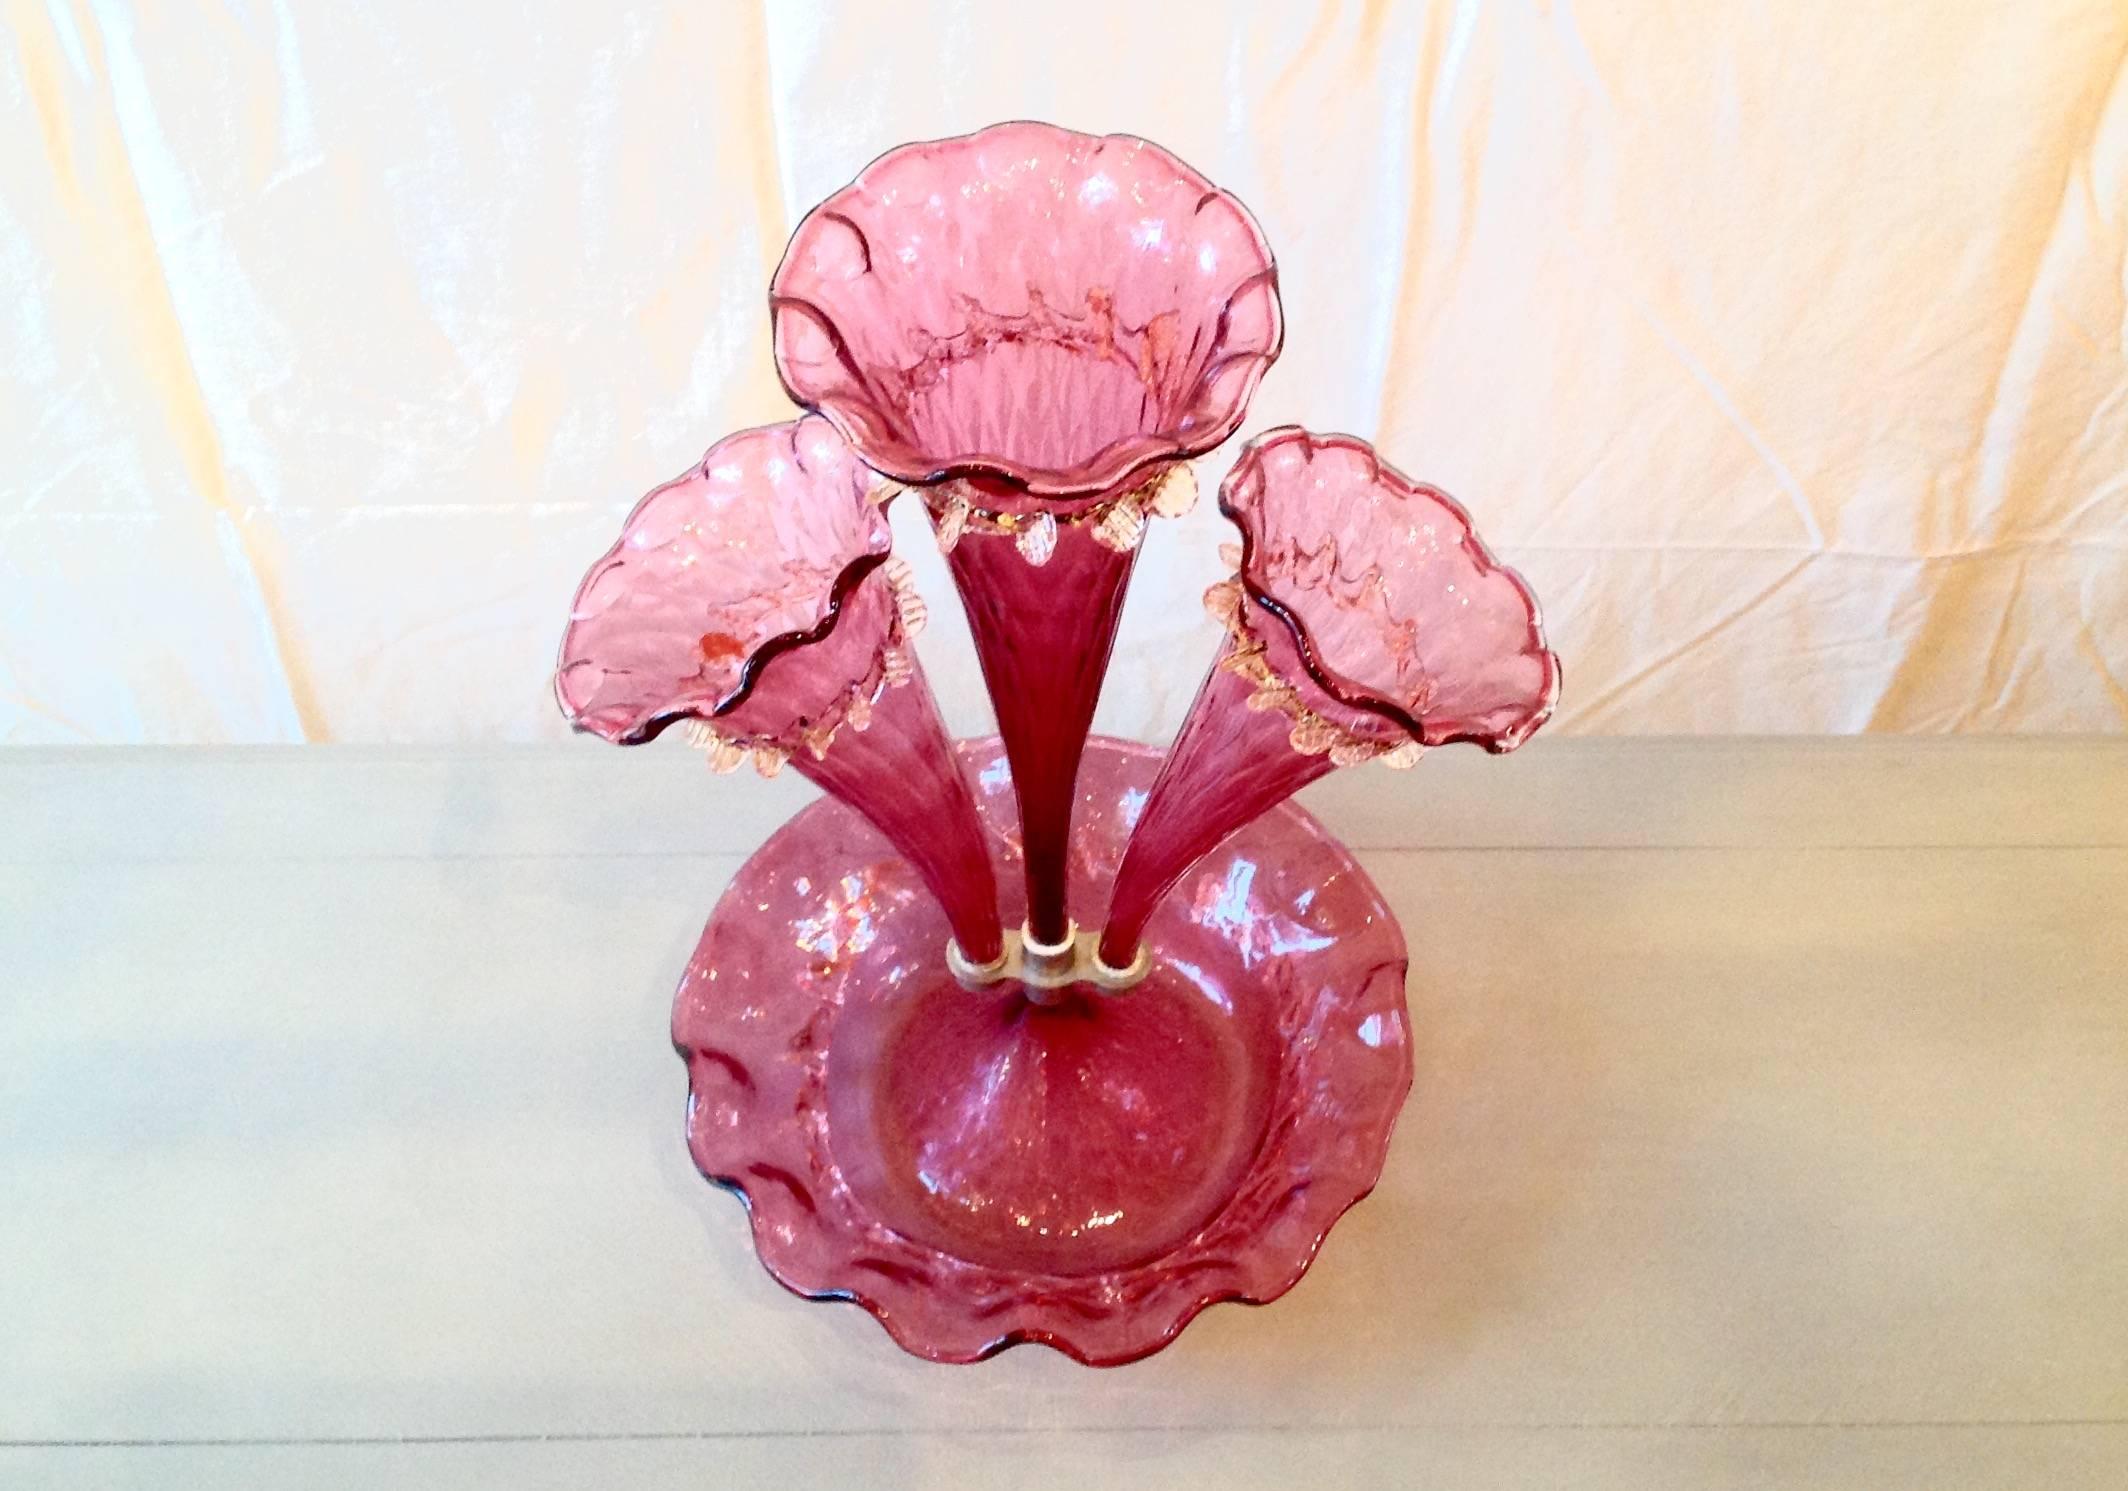 Antique cranberry Italian Murano art glass epergne centerpiece vase, typically used for holding fruit or flowers.